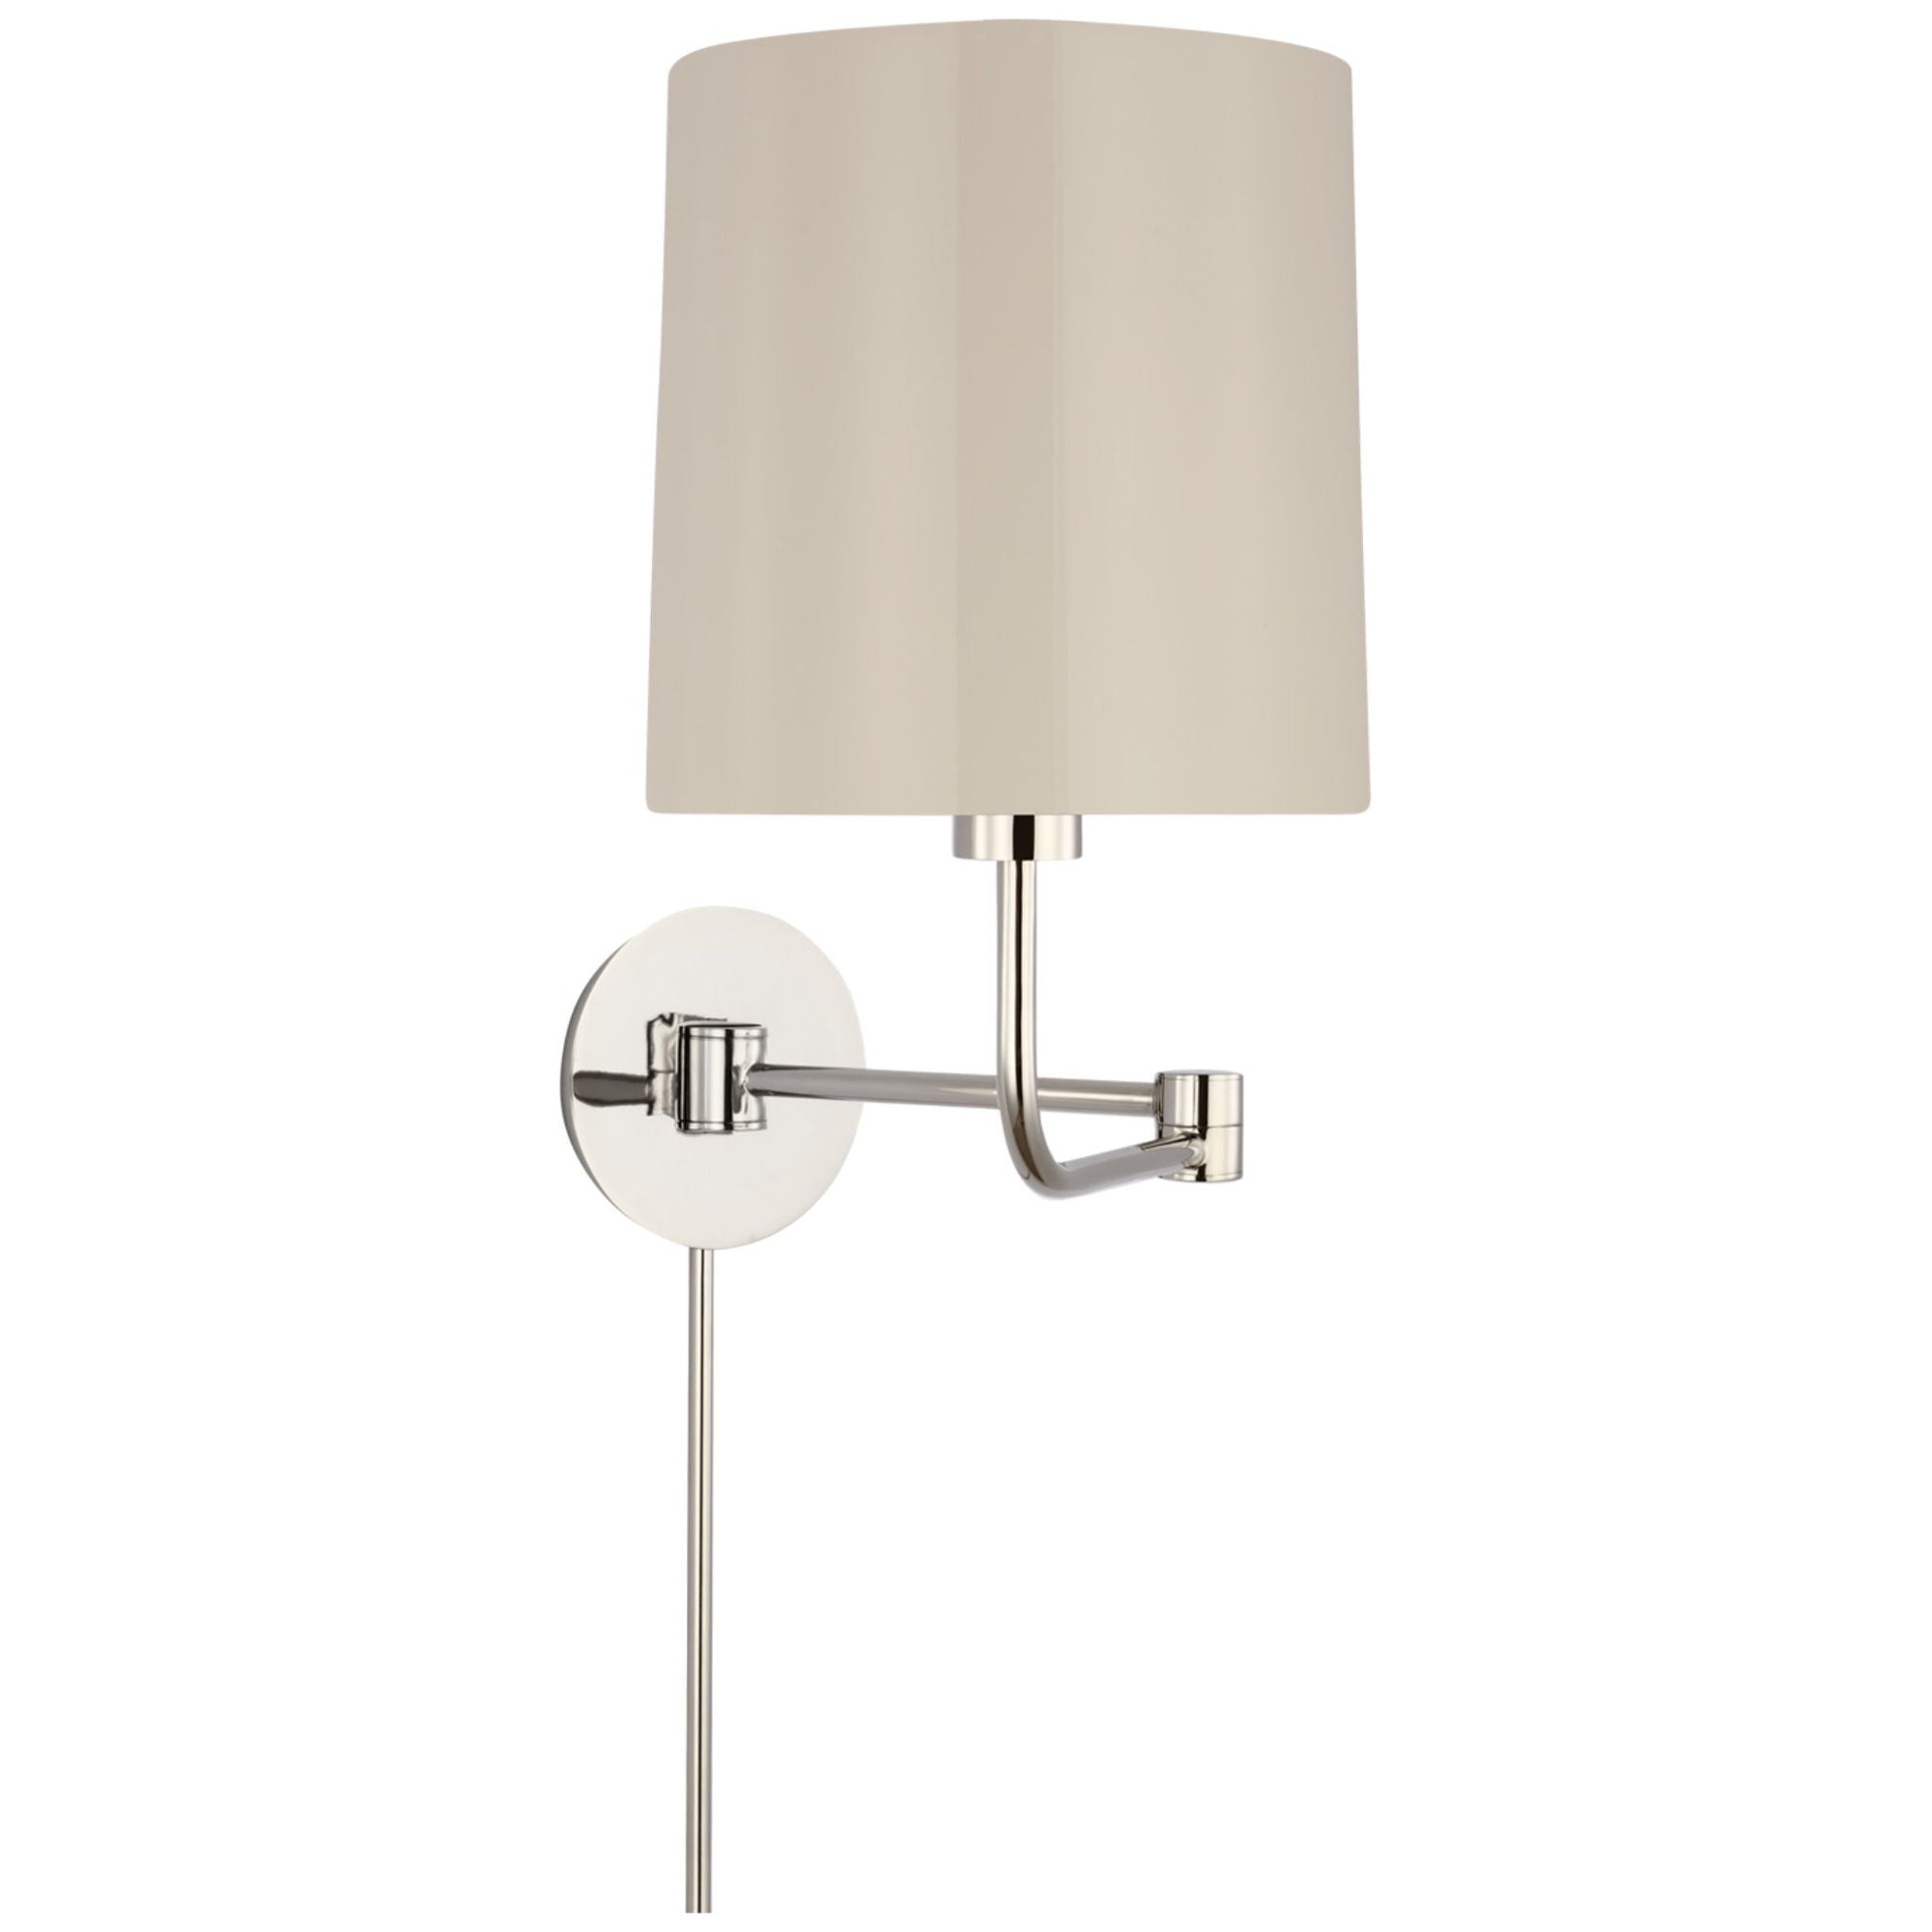 Barbara Barry Go Lightly Swing Arm Wall Light in Polished Nickel with China White Shade